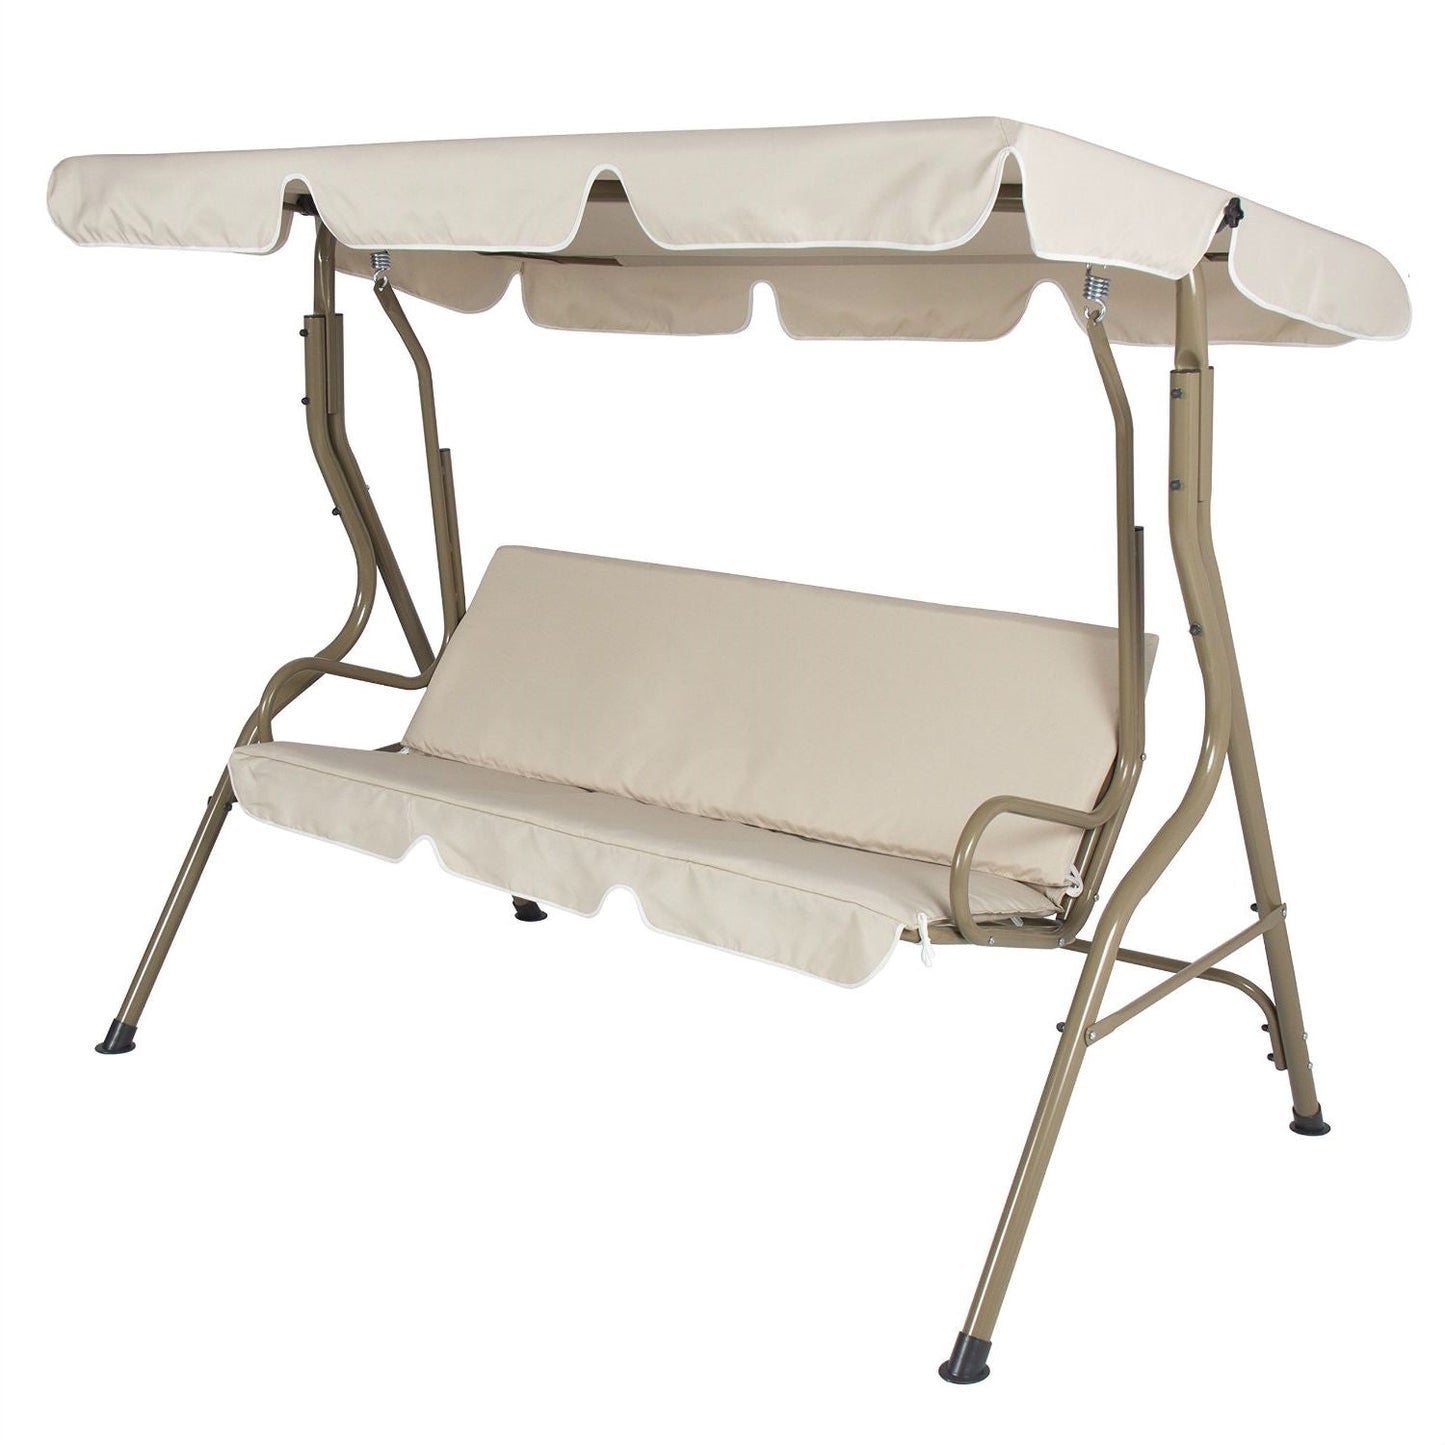 Outdoor > Outdoor Furniture > Porch Swings And Gliders - Outdoor Porch Swing Patio Deck Glider With Canopy In Beige